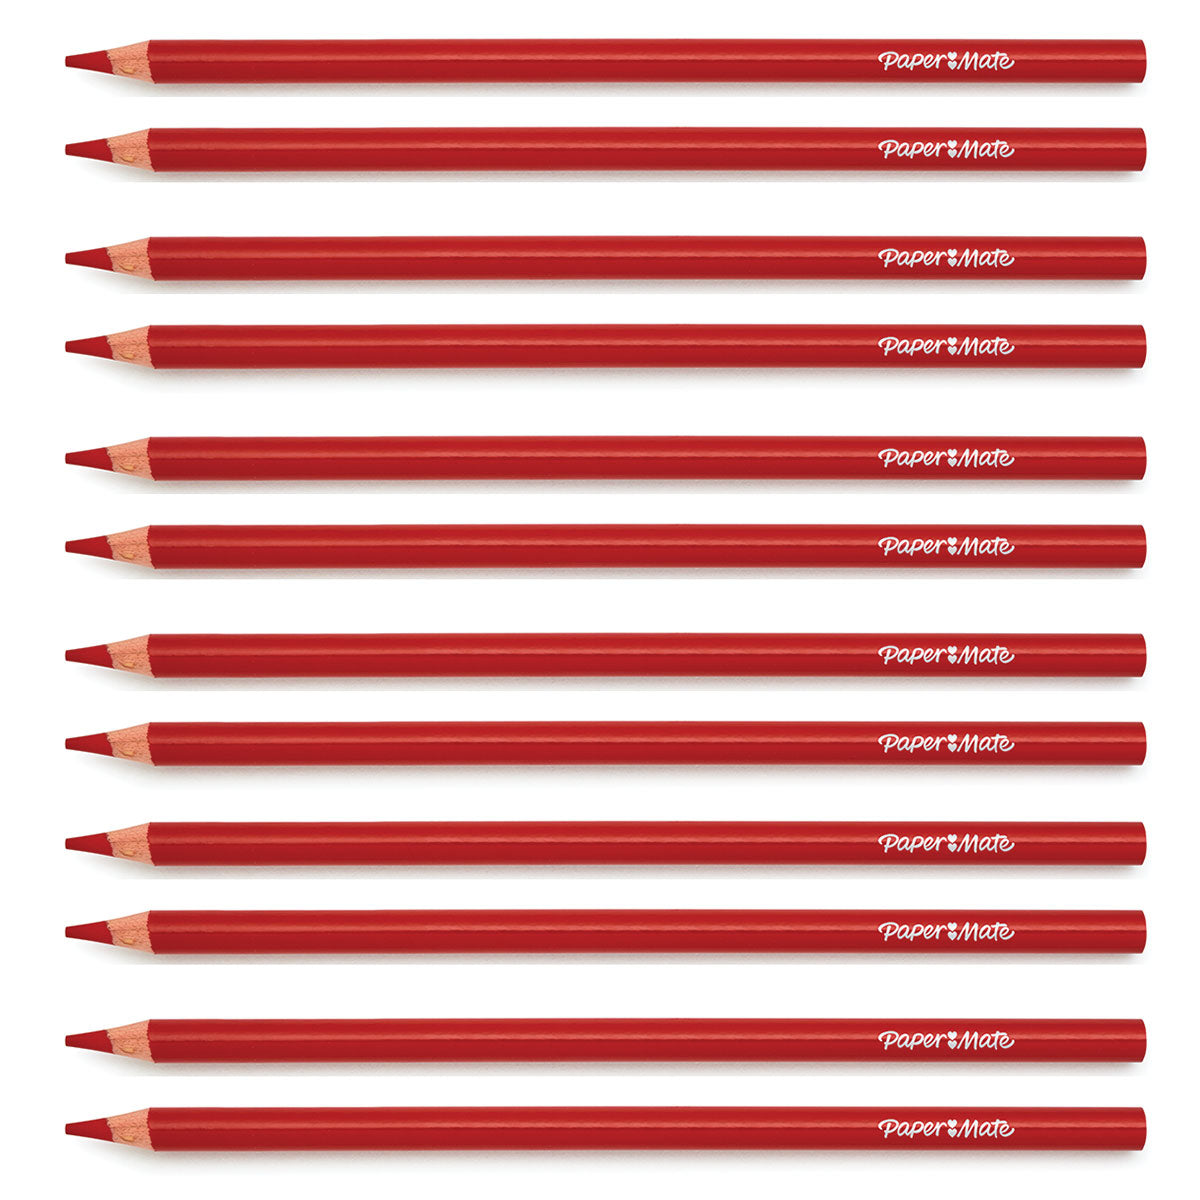 Paper Mate White Colored Pencils Pack of 12 (Writes White)